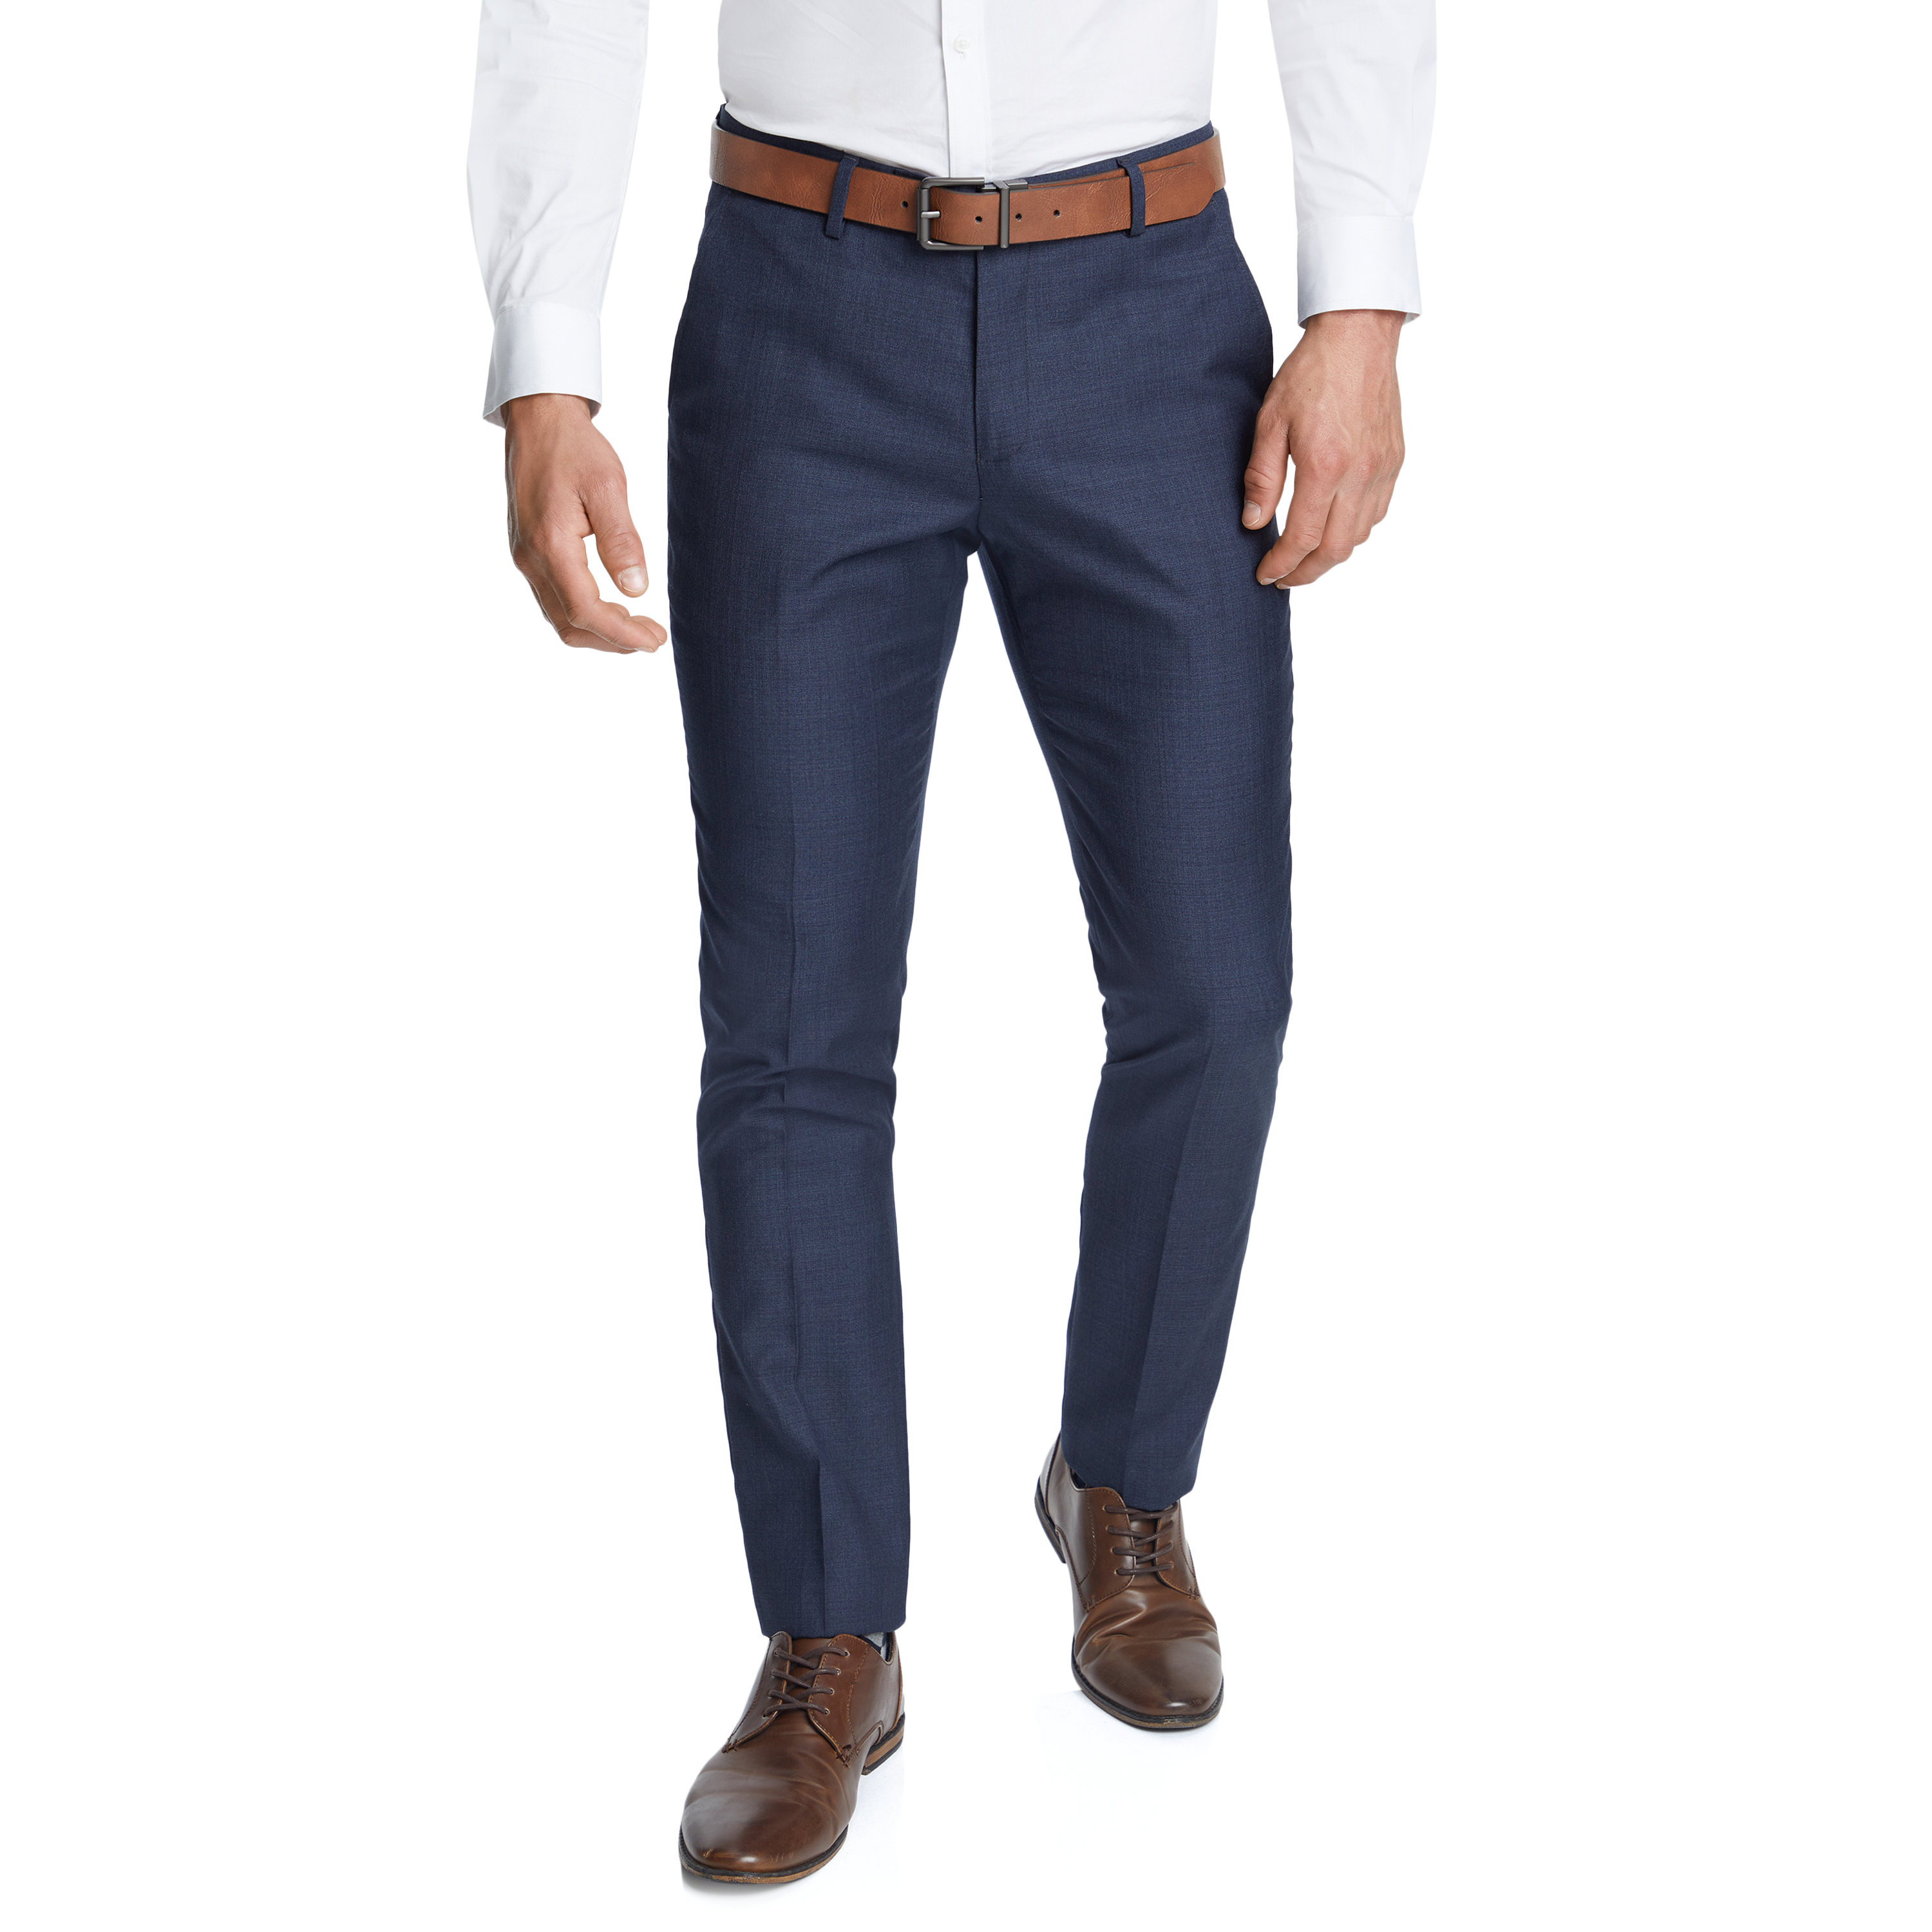 Men's Trousers | Formal, Casual, Chinos, Pants | Indian Terrain